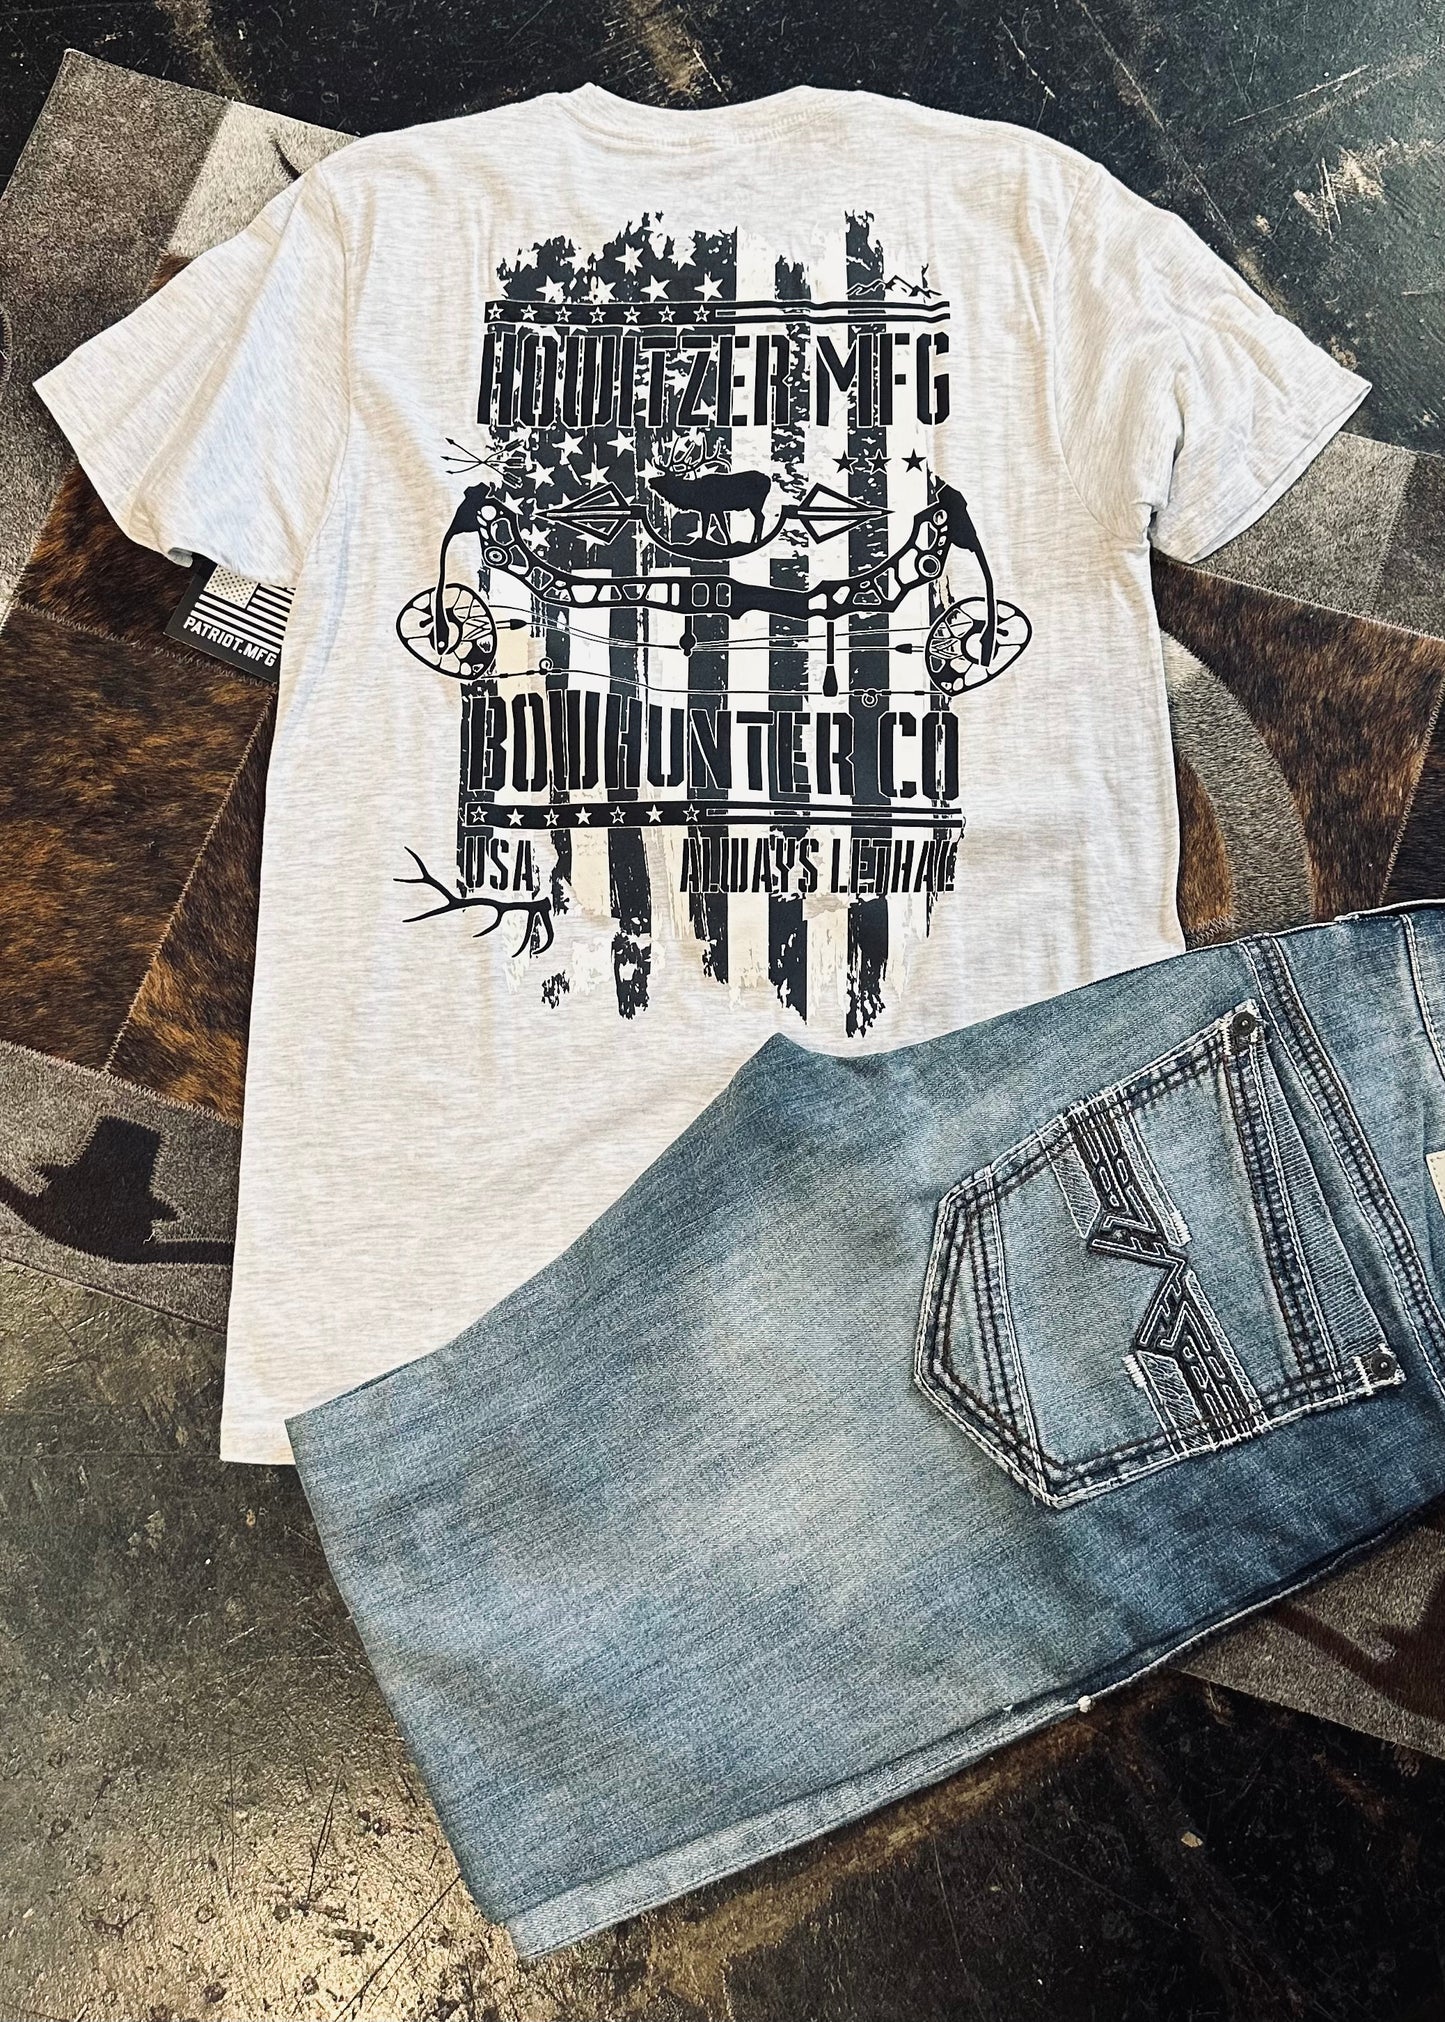 Howitzer Bowhunter Co tee